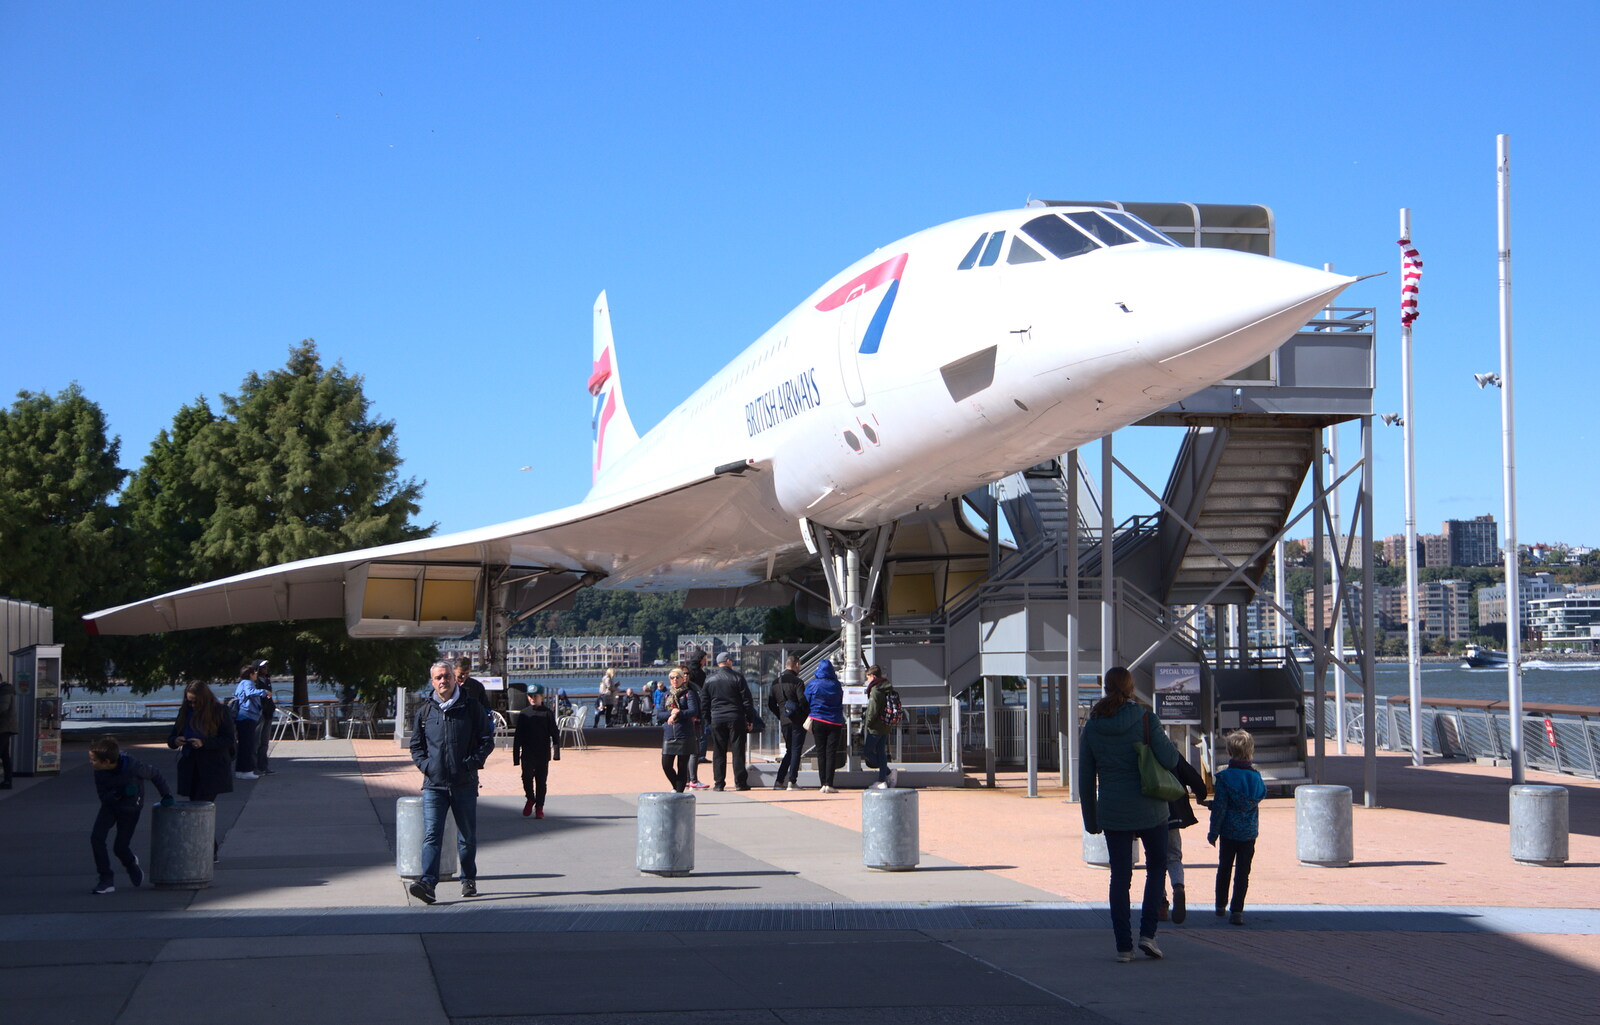 Concorde - it's a crime this isn't still flying from Times Square, USS Intrepid and the High Line, Manhattan, New York - 25th October 2018